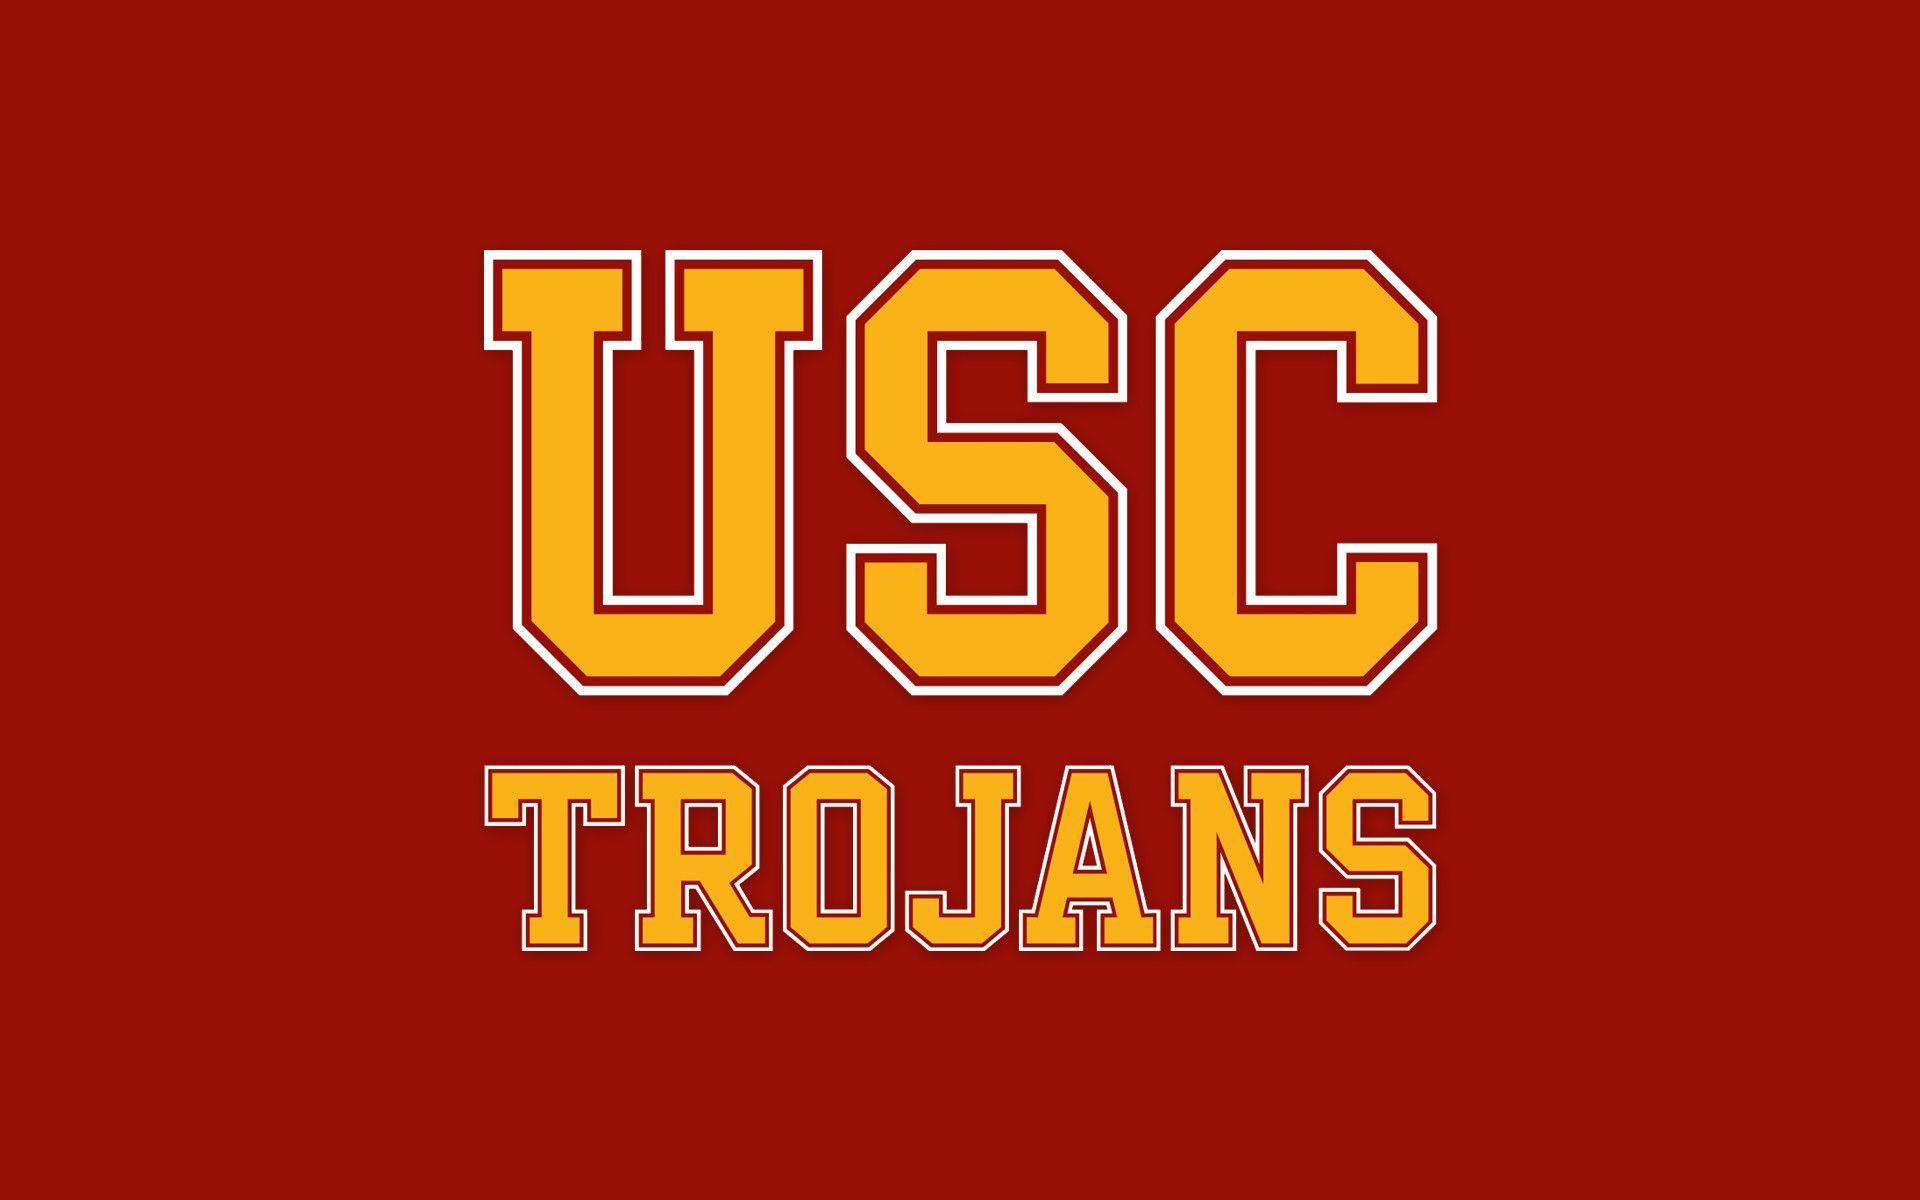 Get a Set of 12 Officially NCAA Licensed USC Trojans iPhone Wallpapers  sized for any model of iPhone with you  Usc trojans Usc trojans football  Usc trojans logo